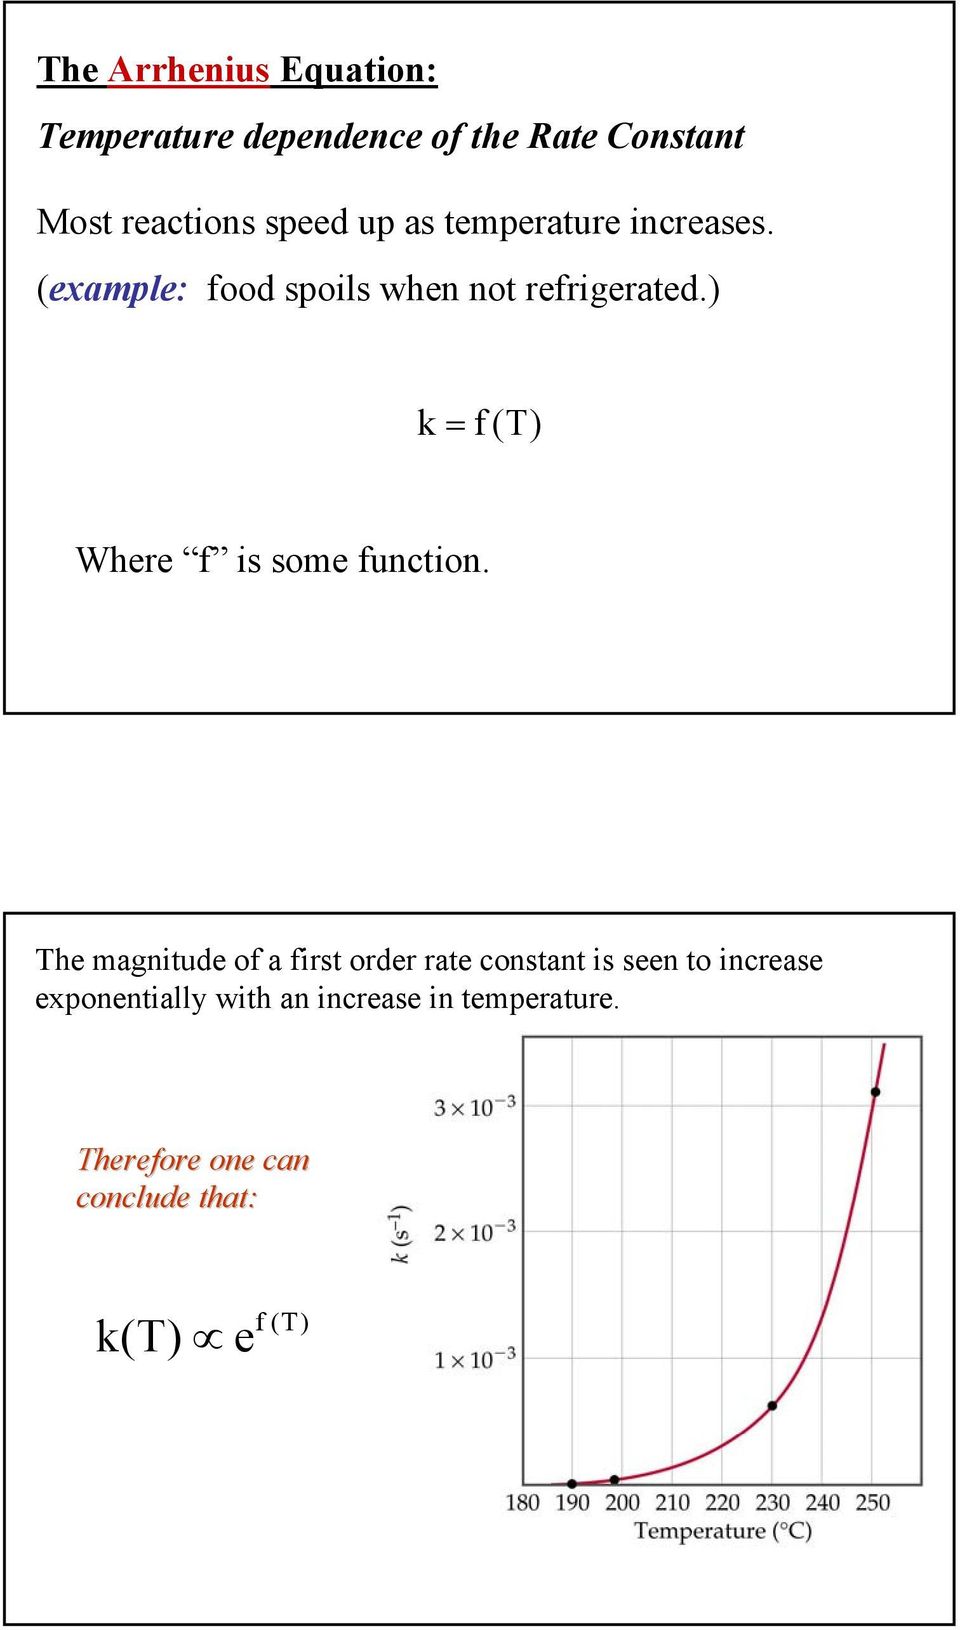 ) k = f(t) Where f is some function.